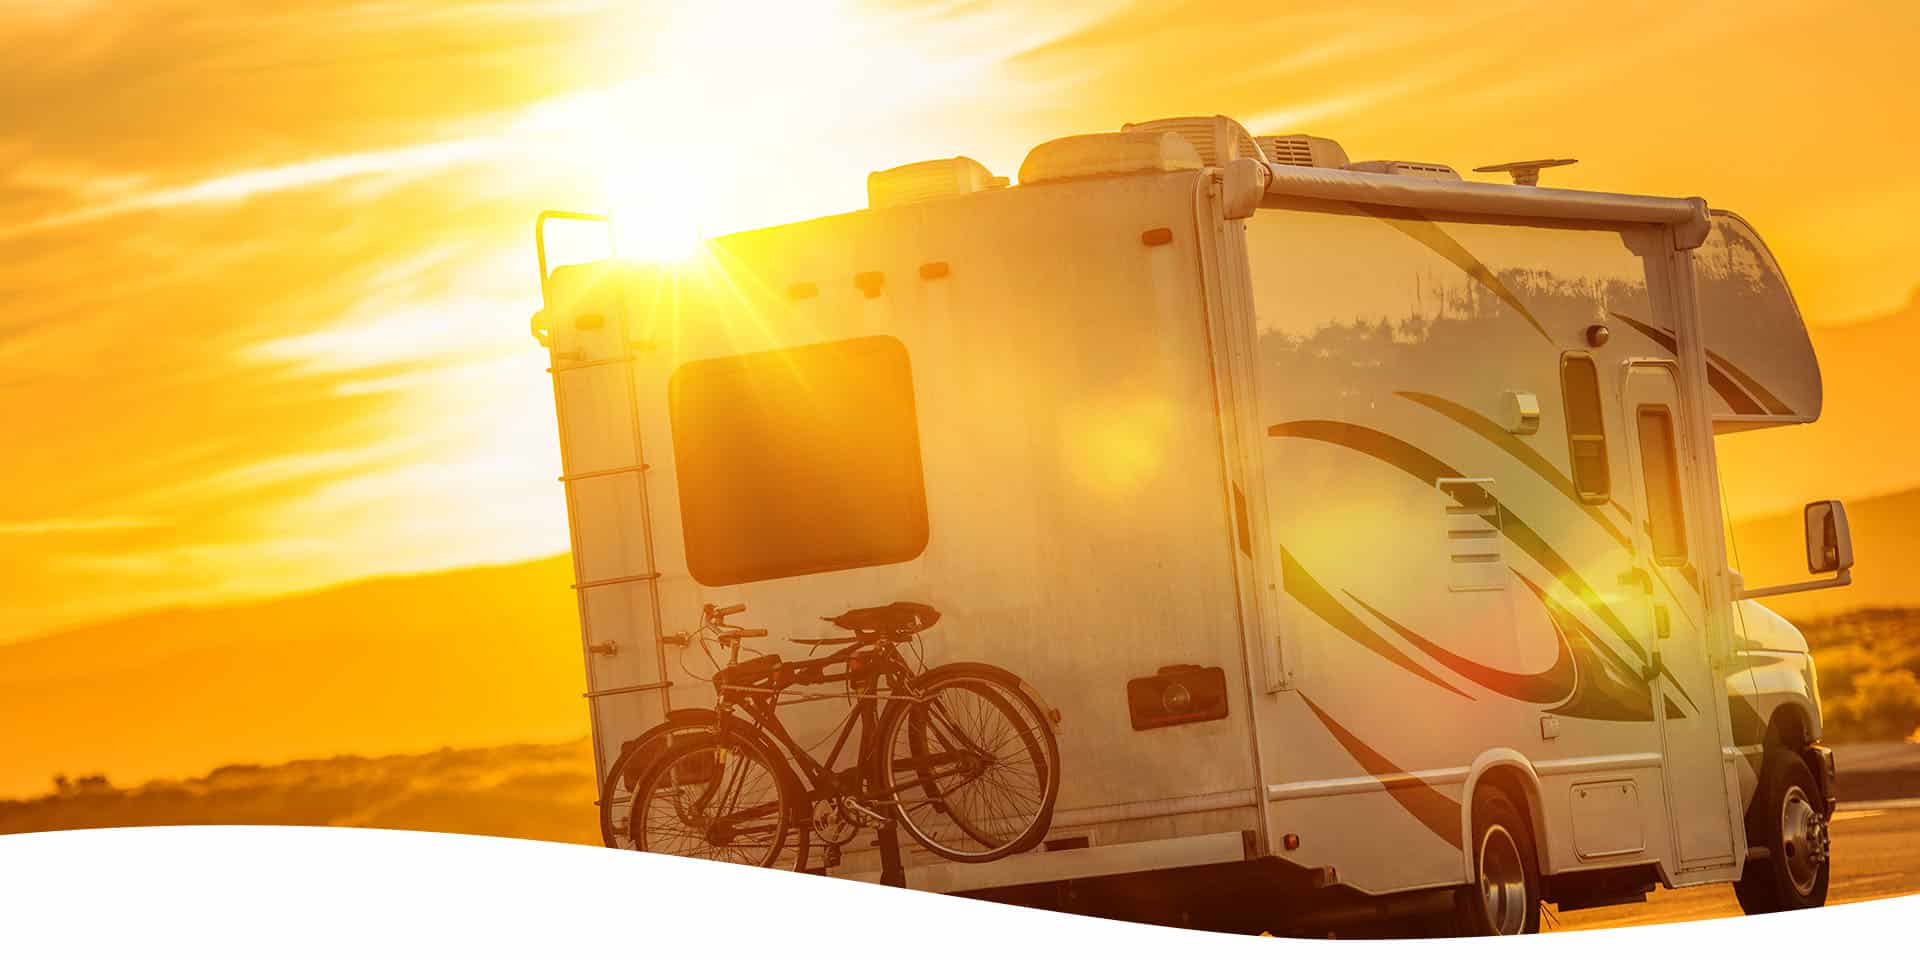 How to Find Safe Parking for Your RV